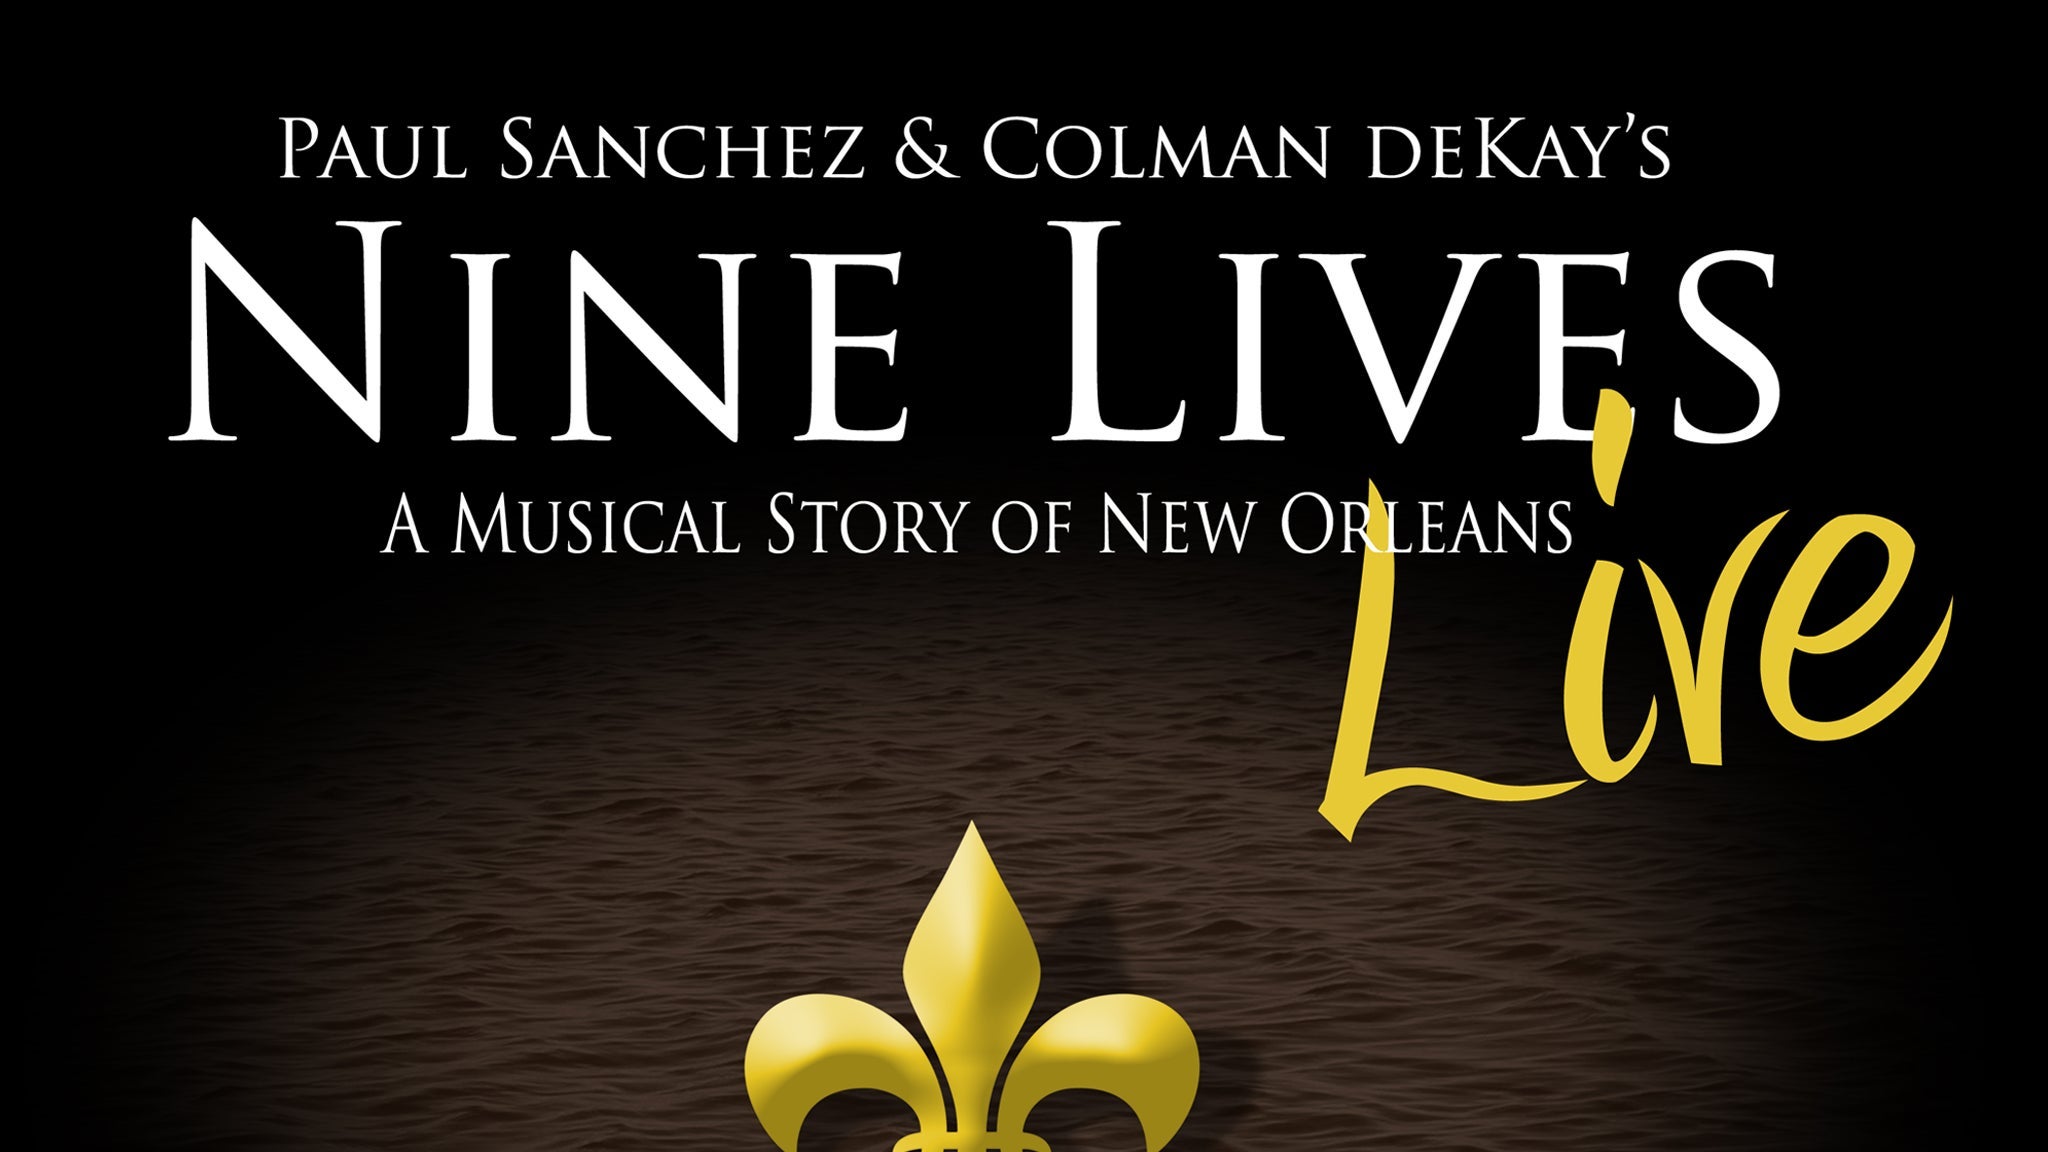 Nine Lives Live! A Musical Story of New Orleans pre-sale passcode for approved tickets in New Orleans